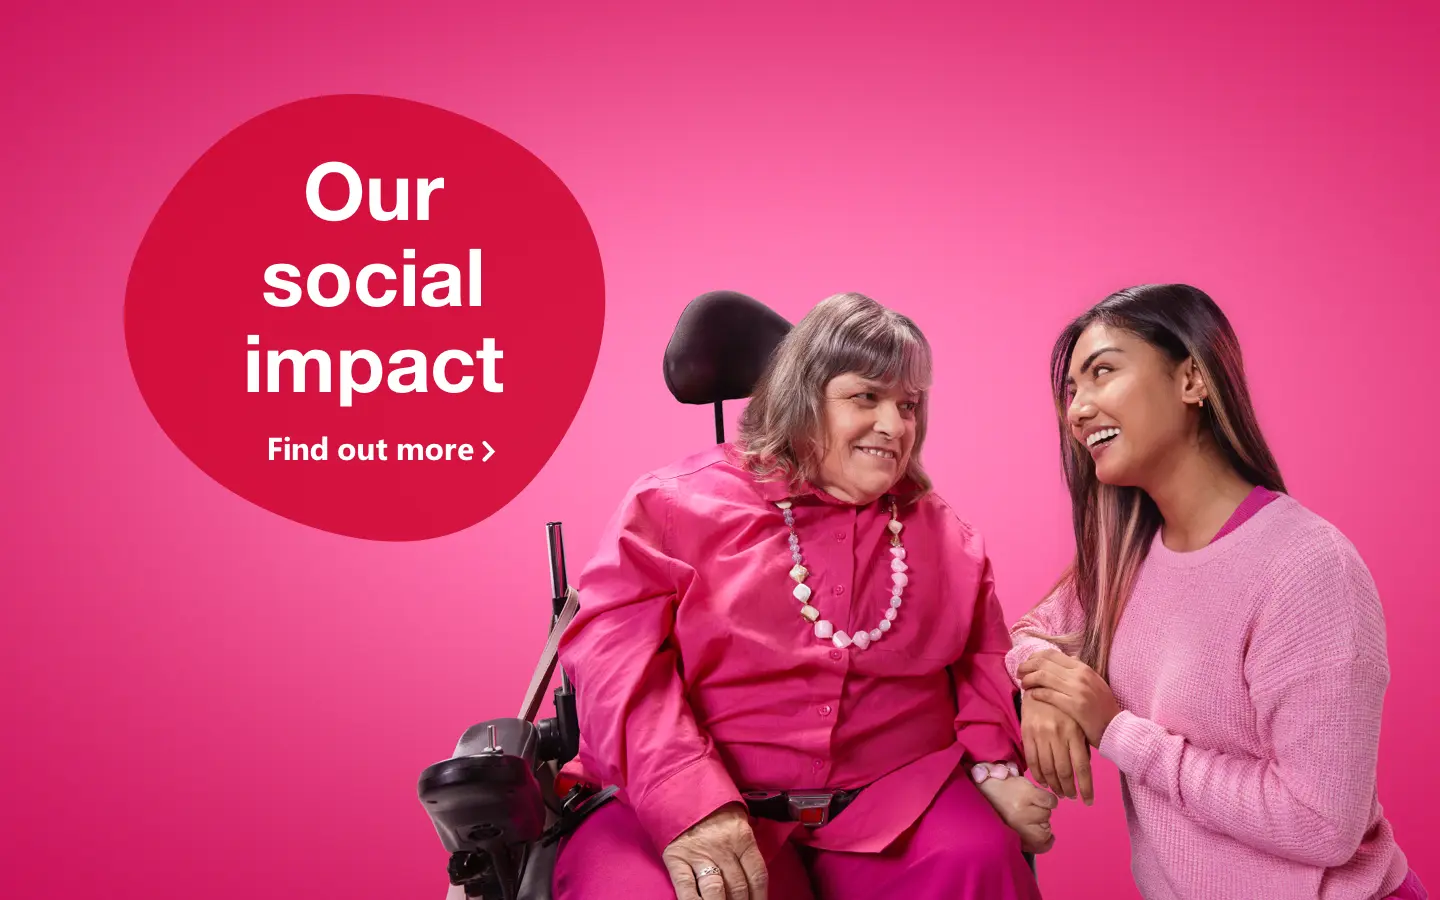 Two women dressed in pink staring at each other smiling, one is in a wheelchair